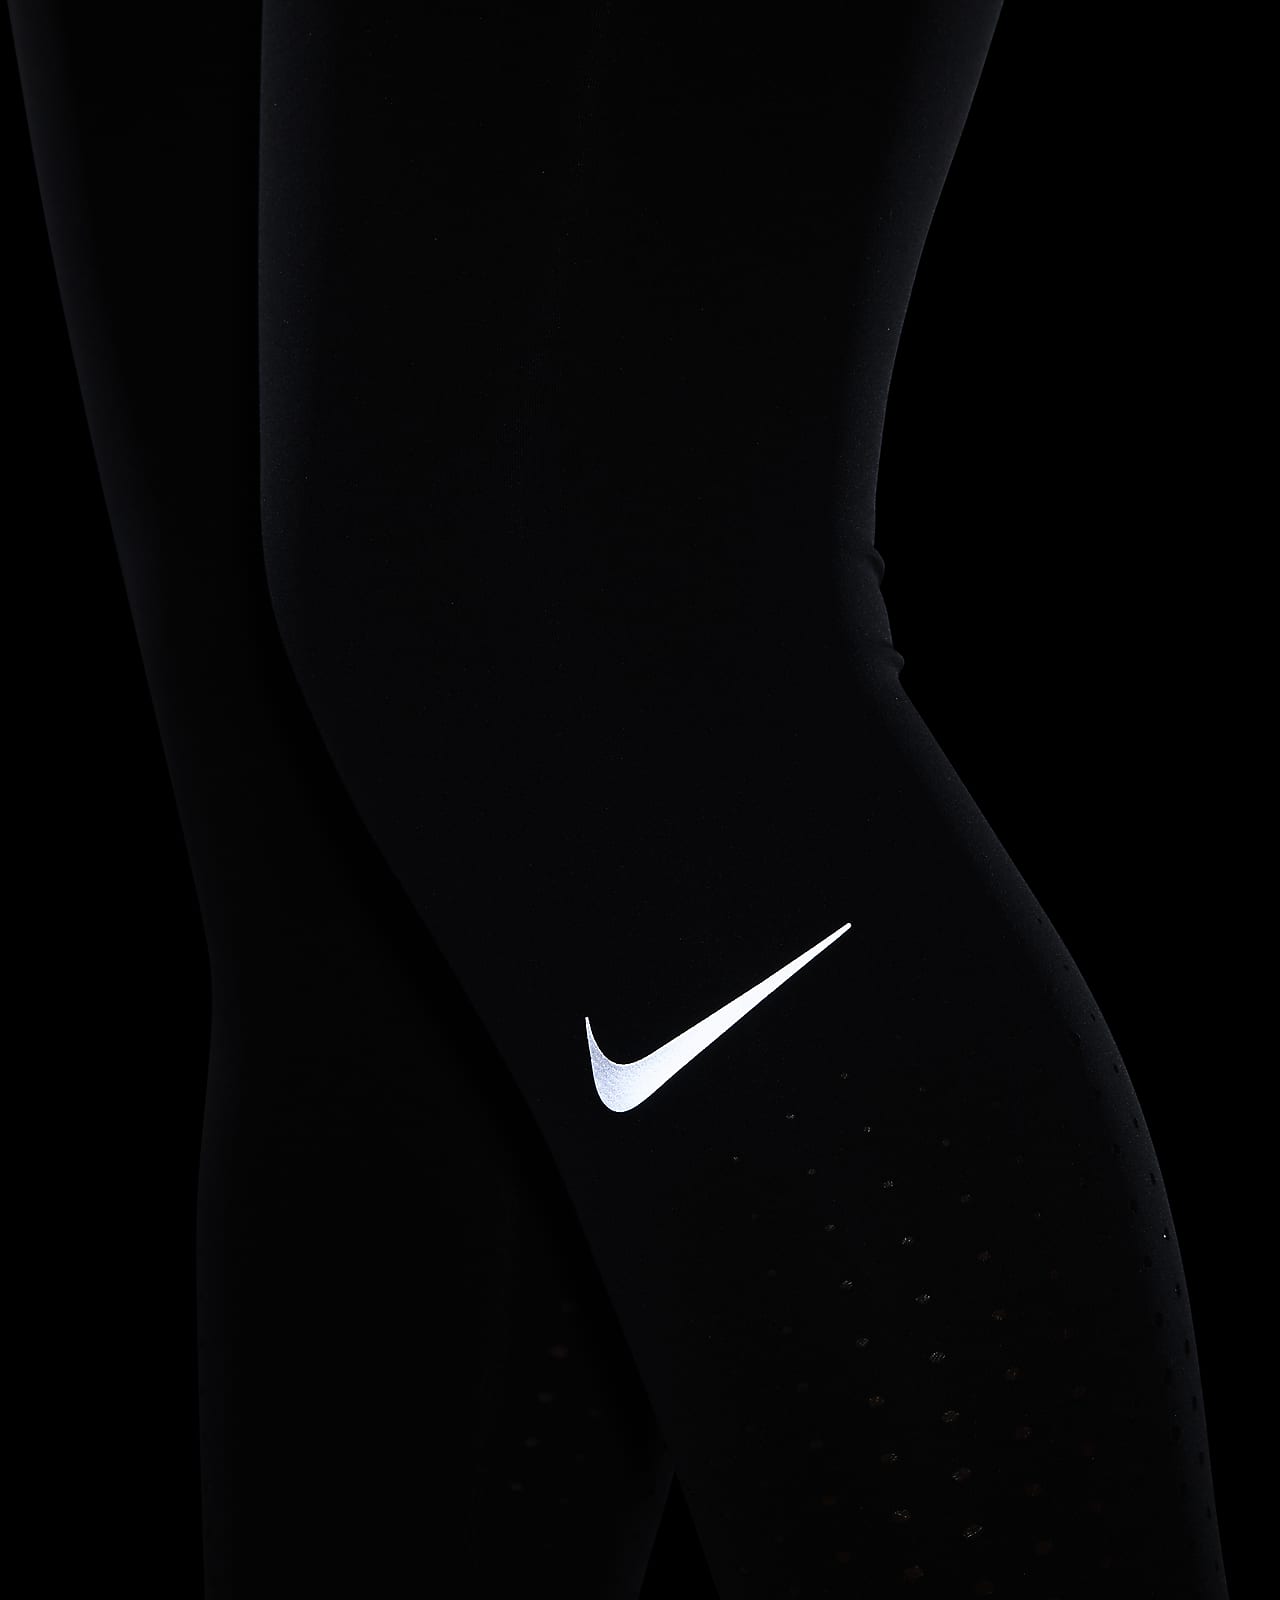 Nike Women's Epic Luxe Tights Size XL Black Style- CN8041-010 Reflective  Symbol